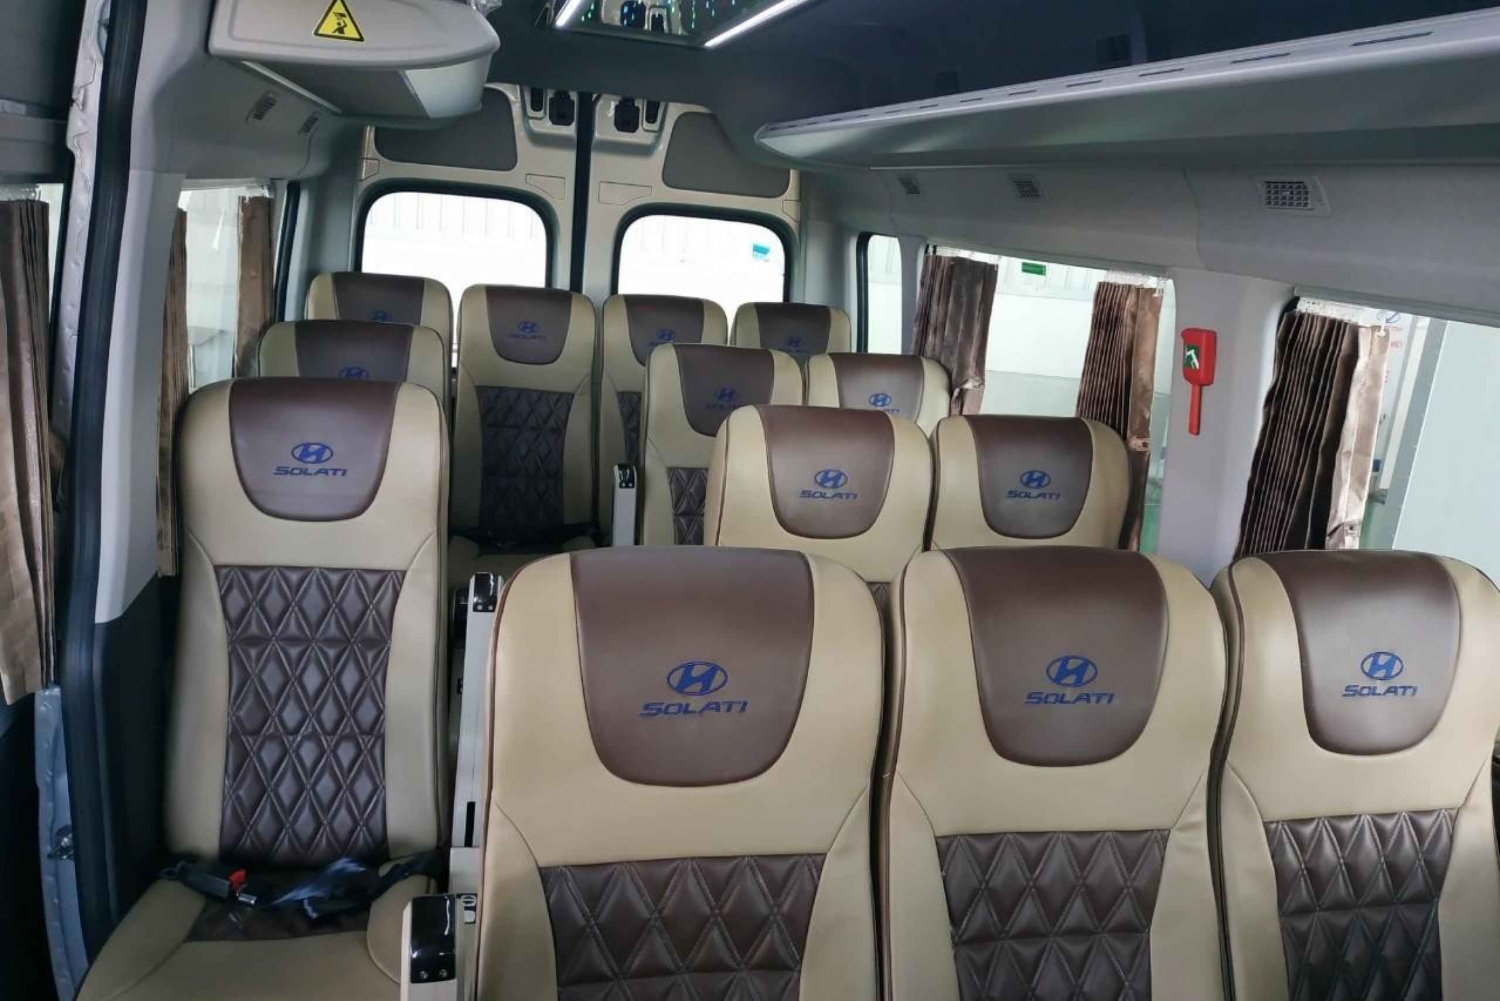 Private transfer between Hanoi and Halong bay